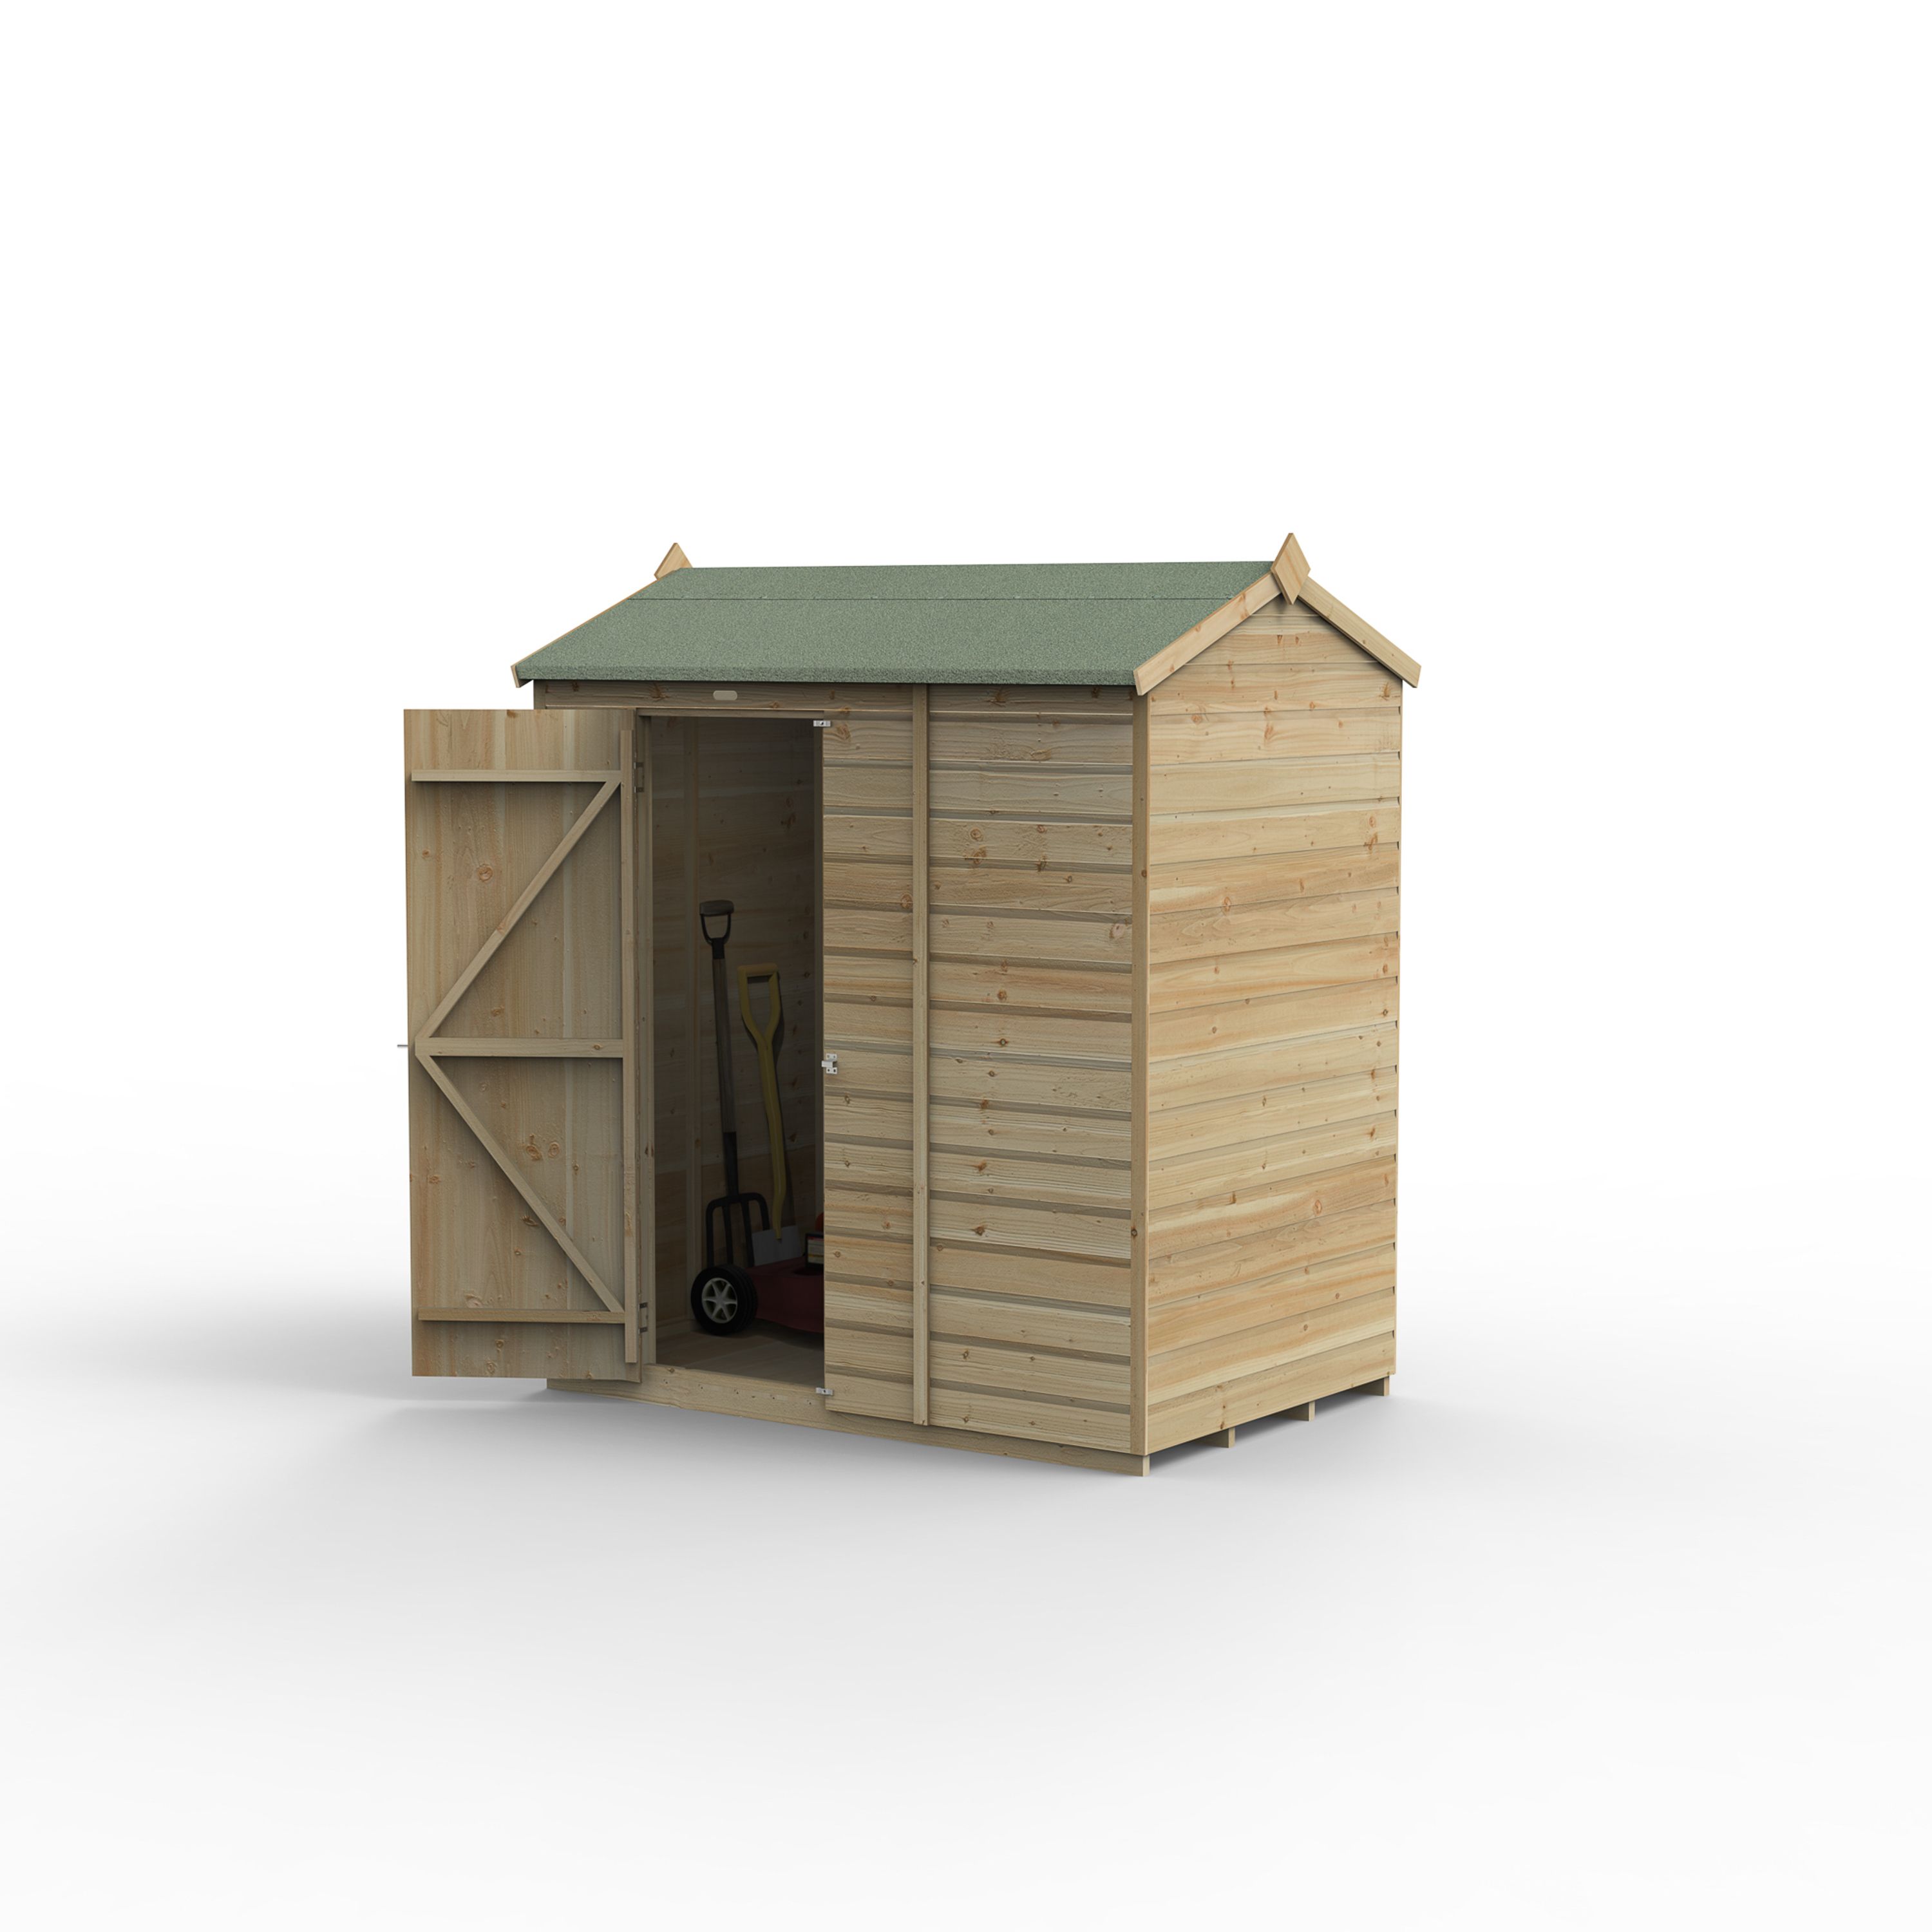 Forest Garden Beckwood 6x4 ft Reverse apex Natural timber Wooden Shed with floor - Assembly not required